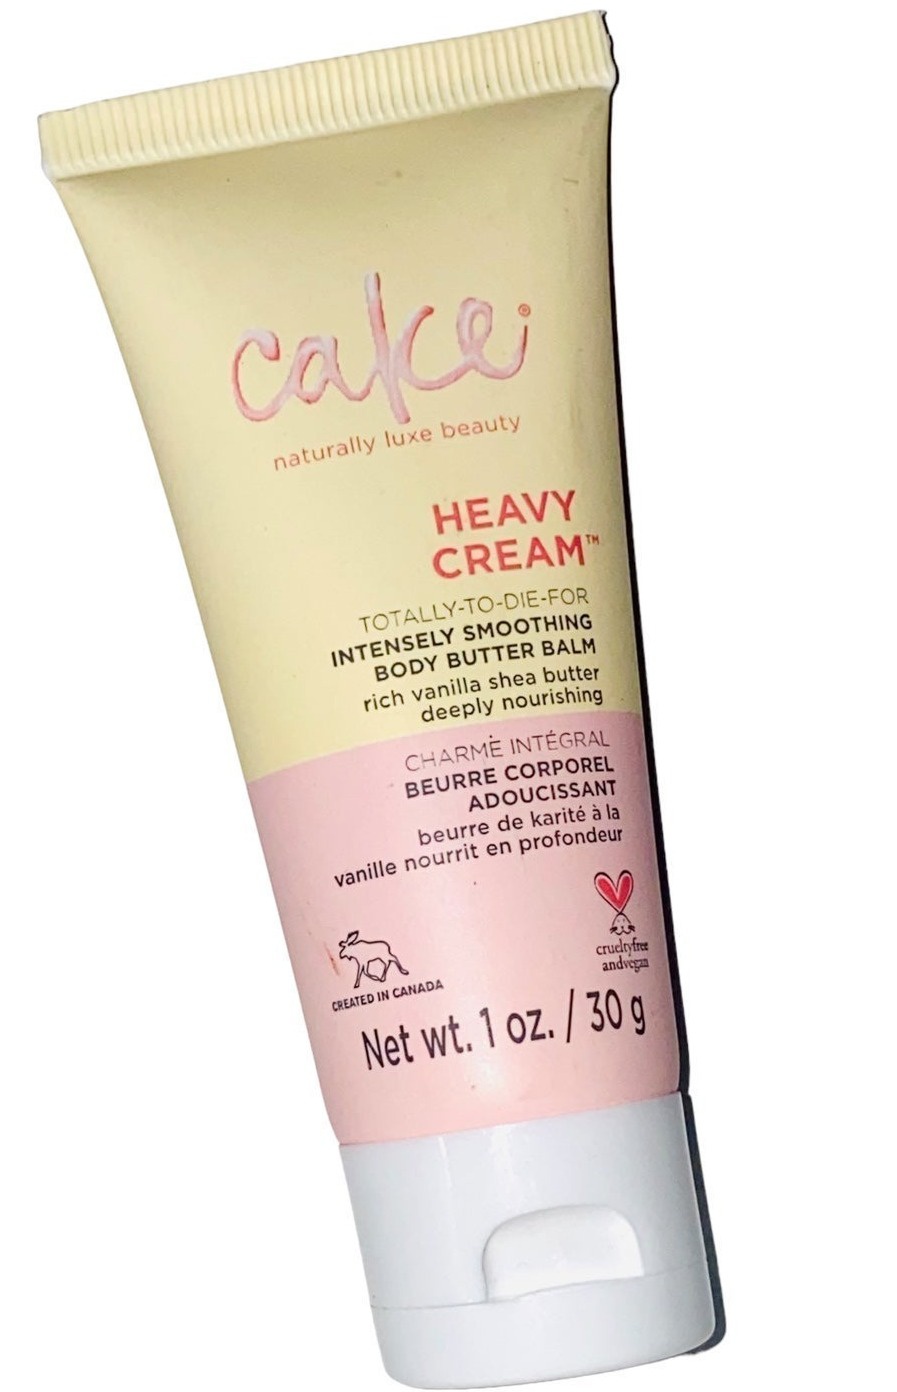 Cake Heavy Cream Intensely Smoothing Body Butter Balm